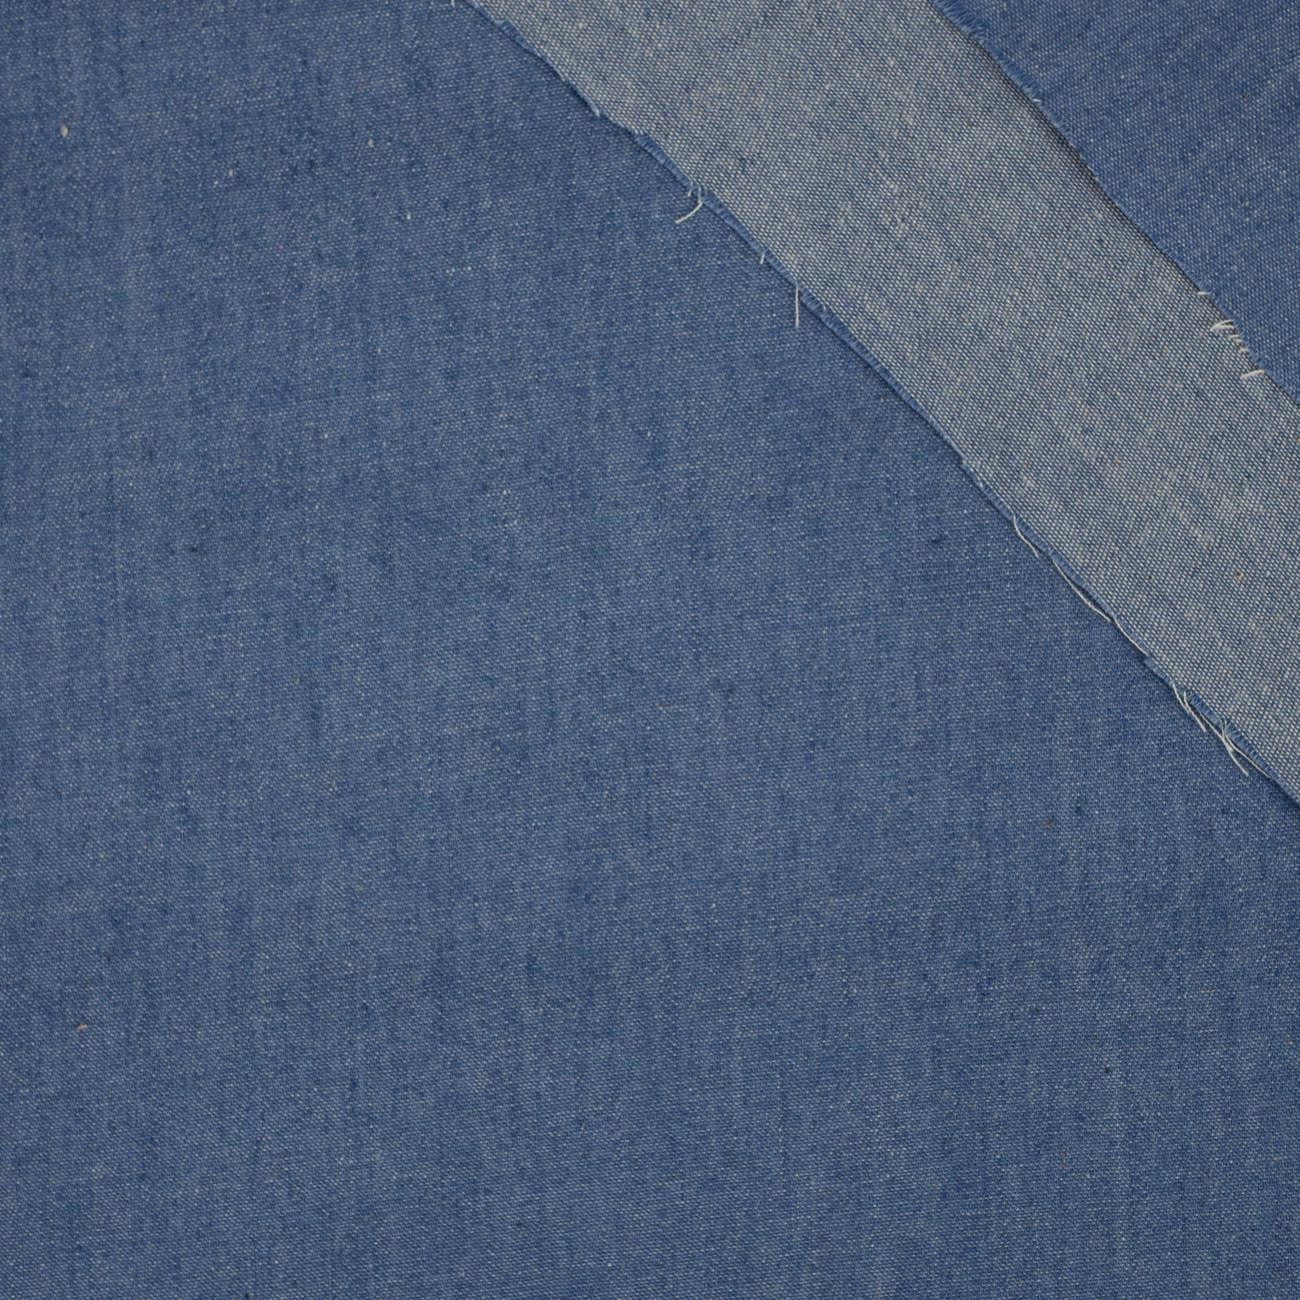 BLUE - Jeans woven fabric 150g